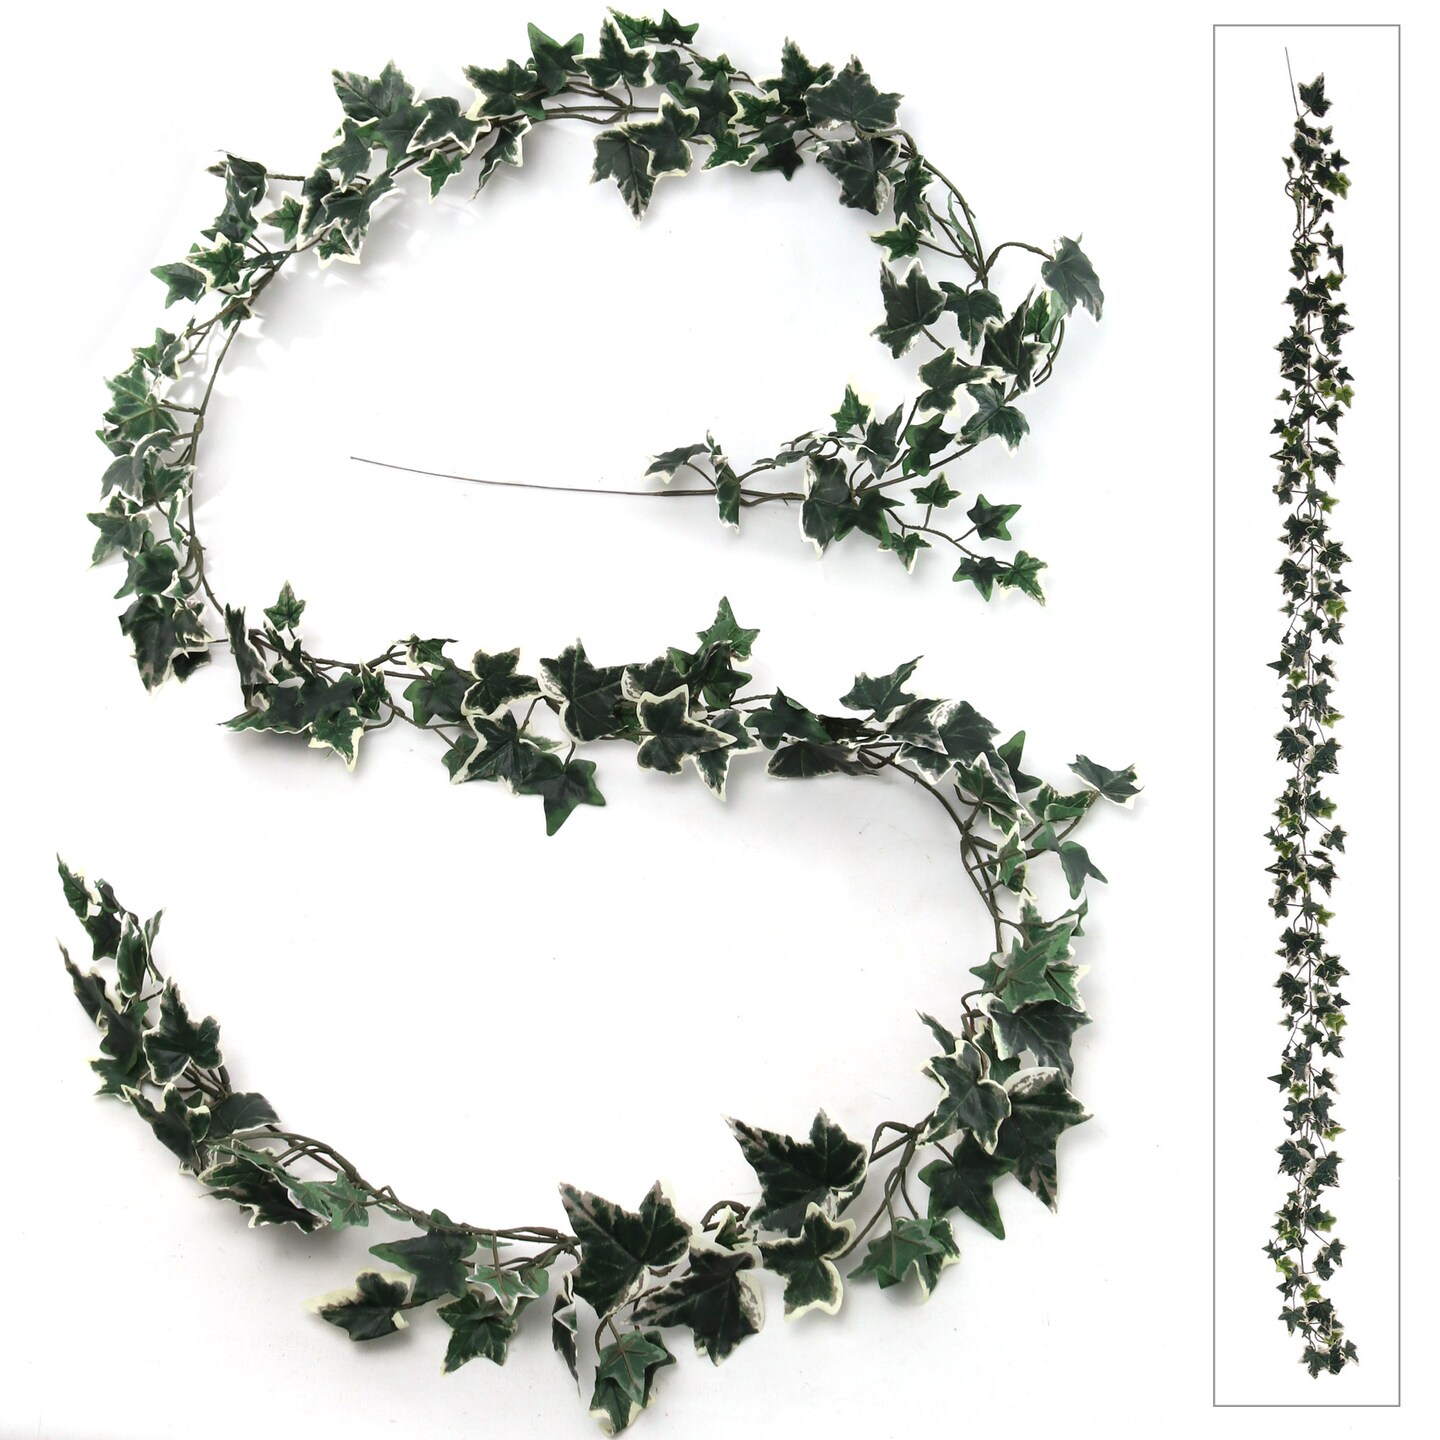 Lush 6&#x27; Variegated English Ivy Garland with 185 Leaves &#x2013; Perfect for Home Decor, Weddings, and Festive Occasions